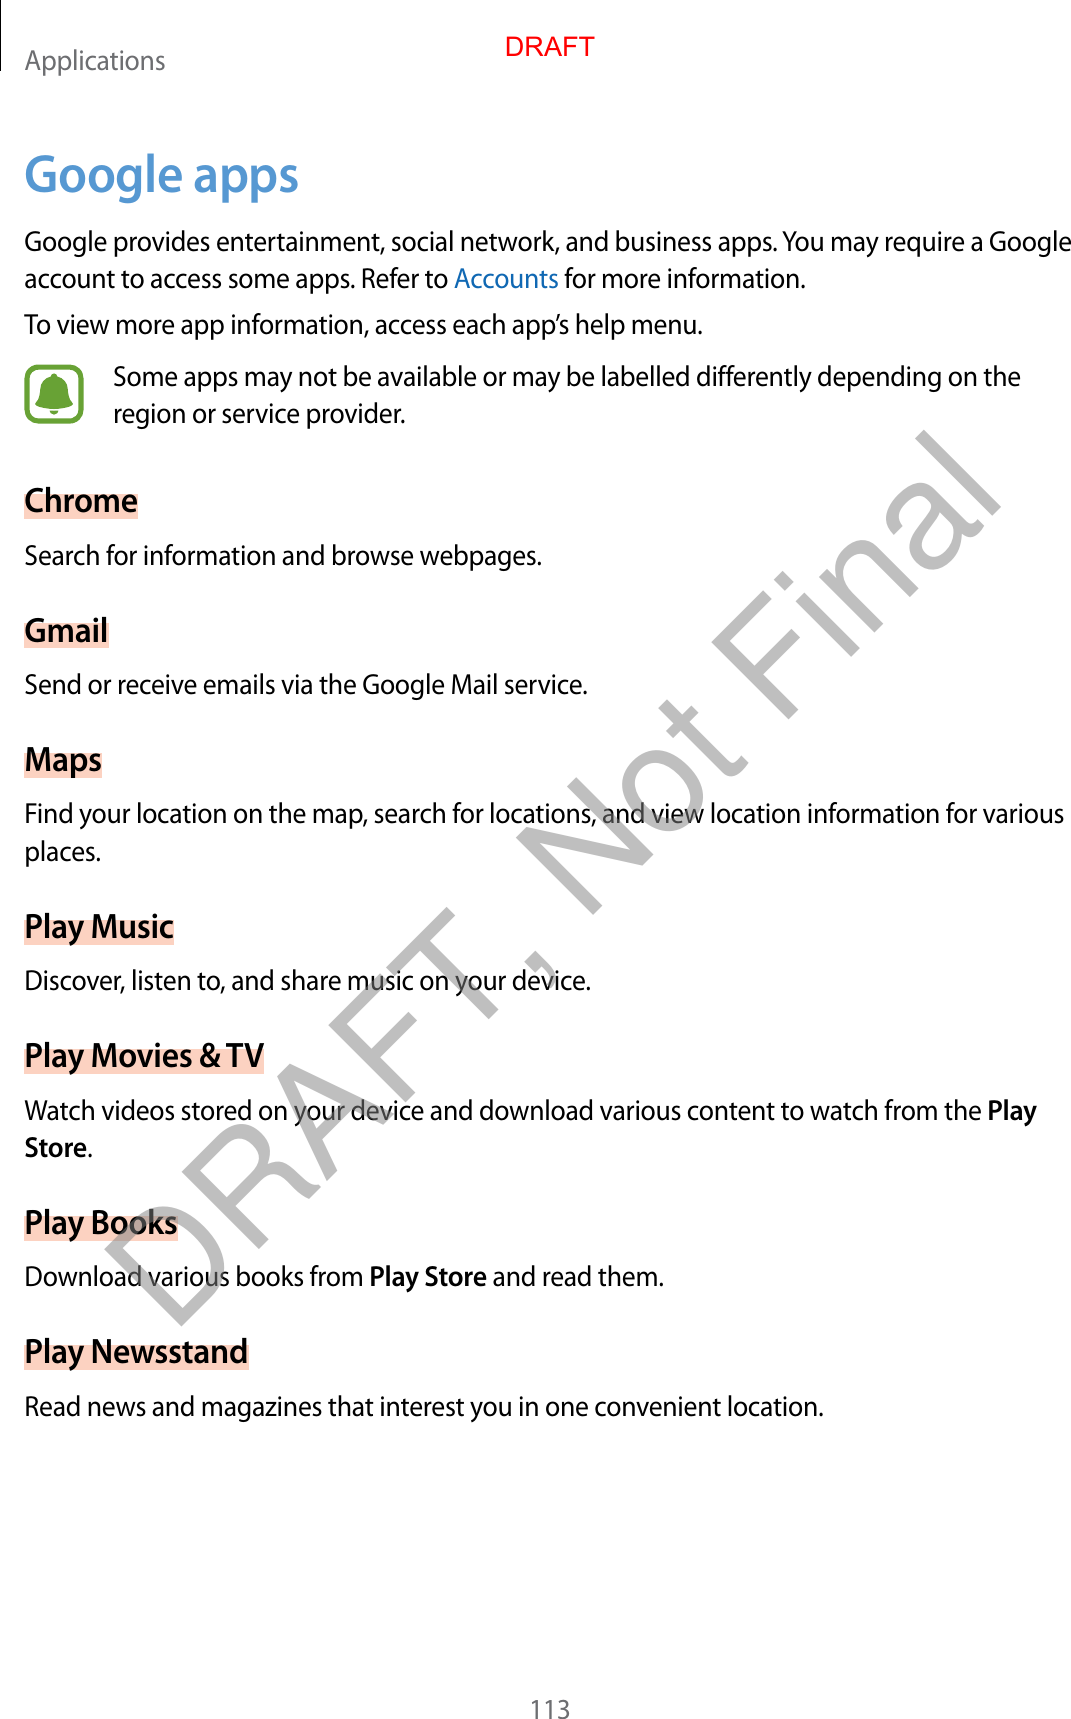 Applications113Google appsGoogle provides entertainment, social network, and business apps. You may require a Google account to access some apps. Refer to Accounts for more information.To view more app information, access each app’s help menu.Some apps may not be available or may be labelled differently depending on the region or service provider.ChromeSearch for information and browse webpages.GmailSend or receive emails via the Google Mail service.MapsFind your location on the map, search for locations, and view location information for various places.Play MusicDiscover, listen to, and share music on your device.Play Movies &amp; TVWatch videos stored on your device and download various content to watch from the Play Store.Play BooksDownload various books from Play Store and read them.Play NewsstandRead news and magazines that interest you in one convenient location.DRAFTDRAFT, Not Final